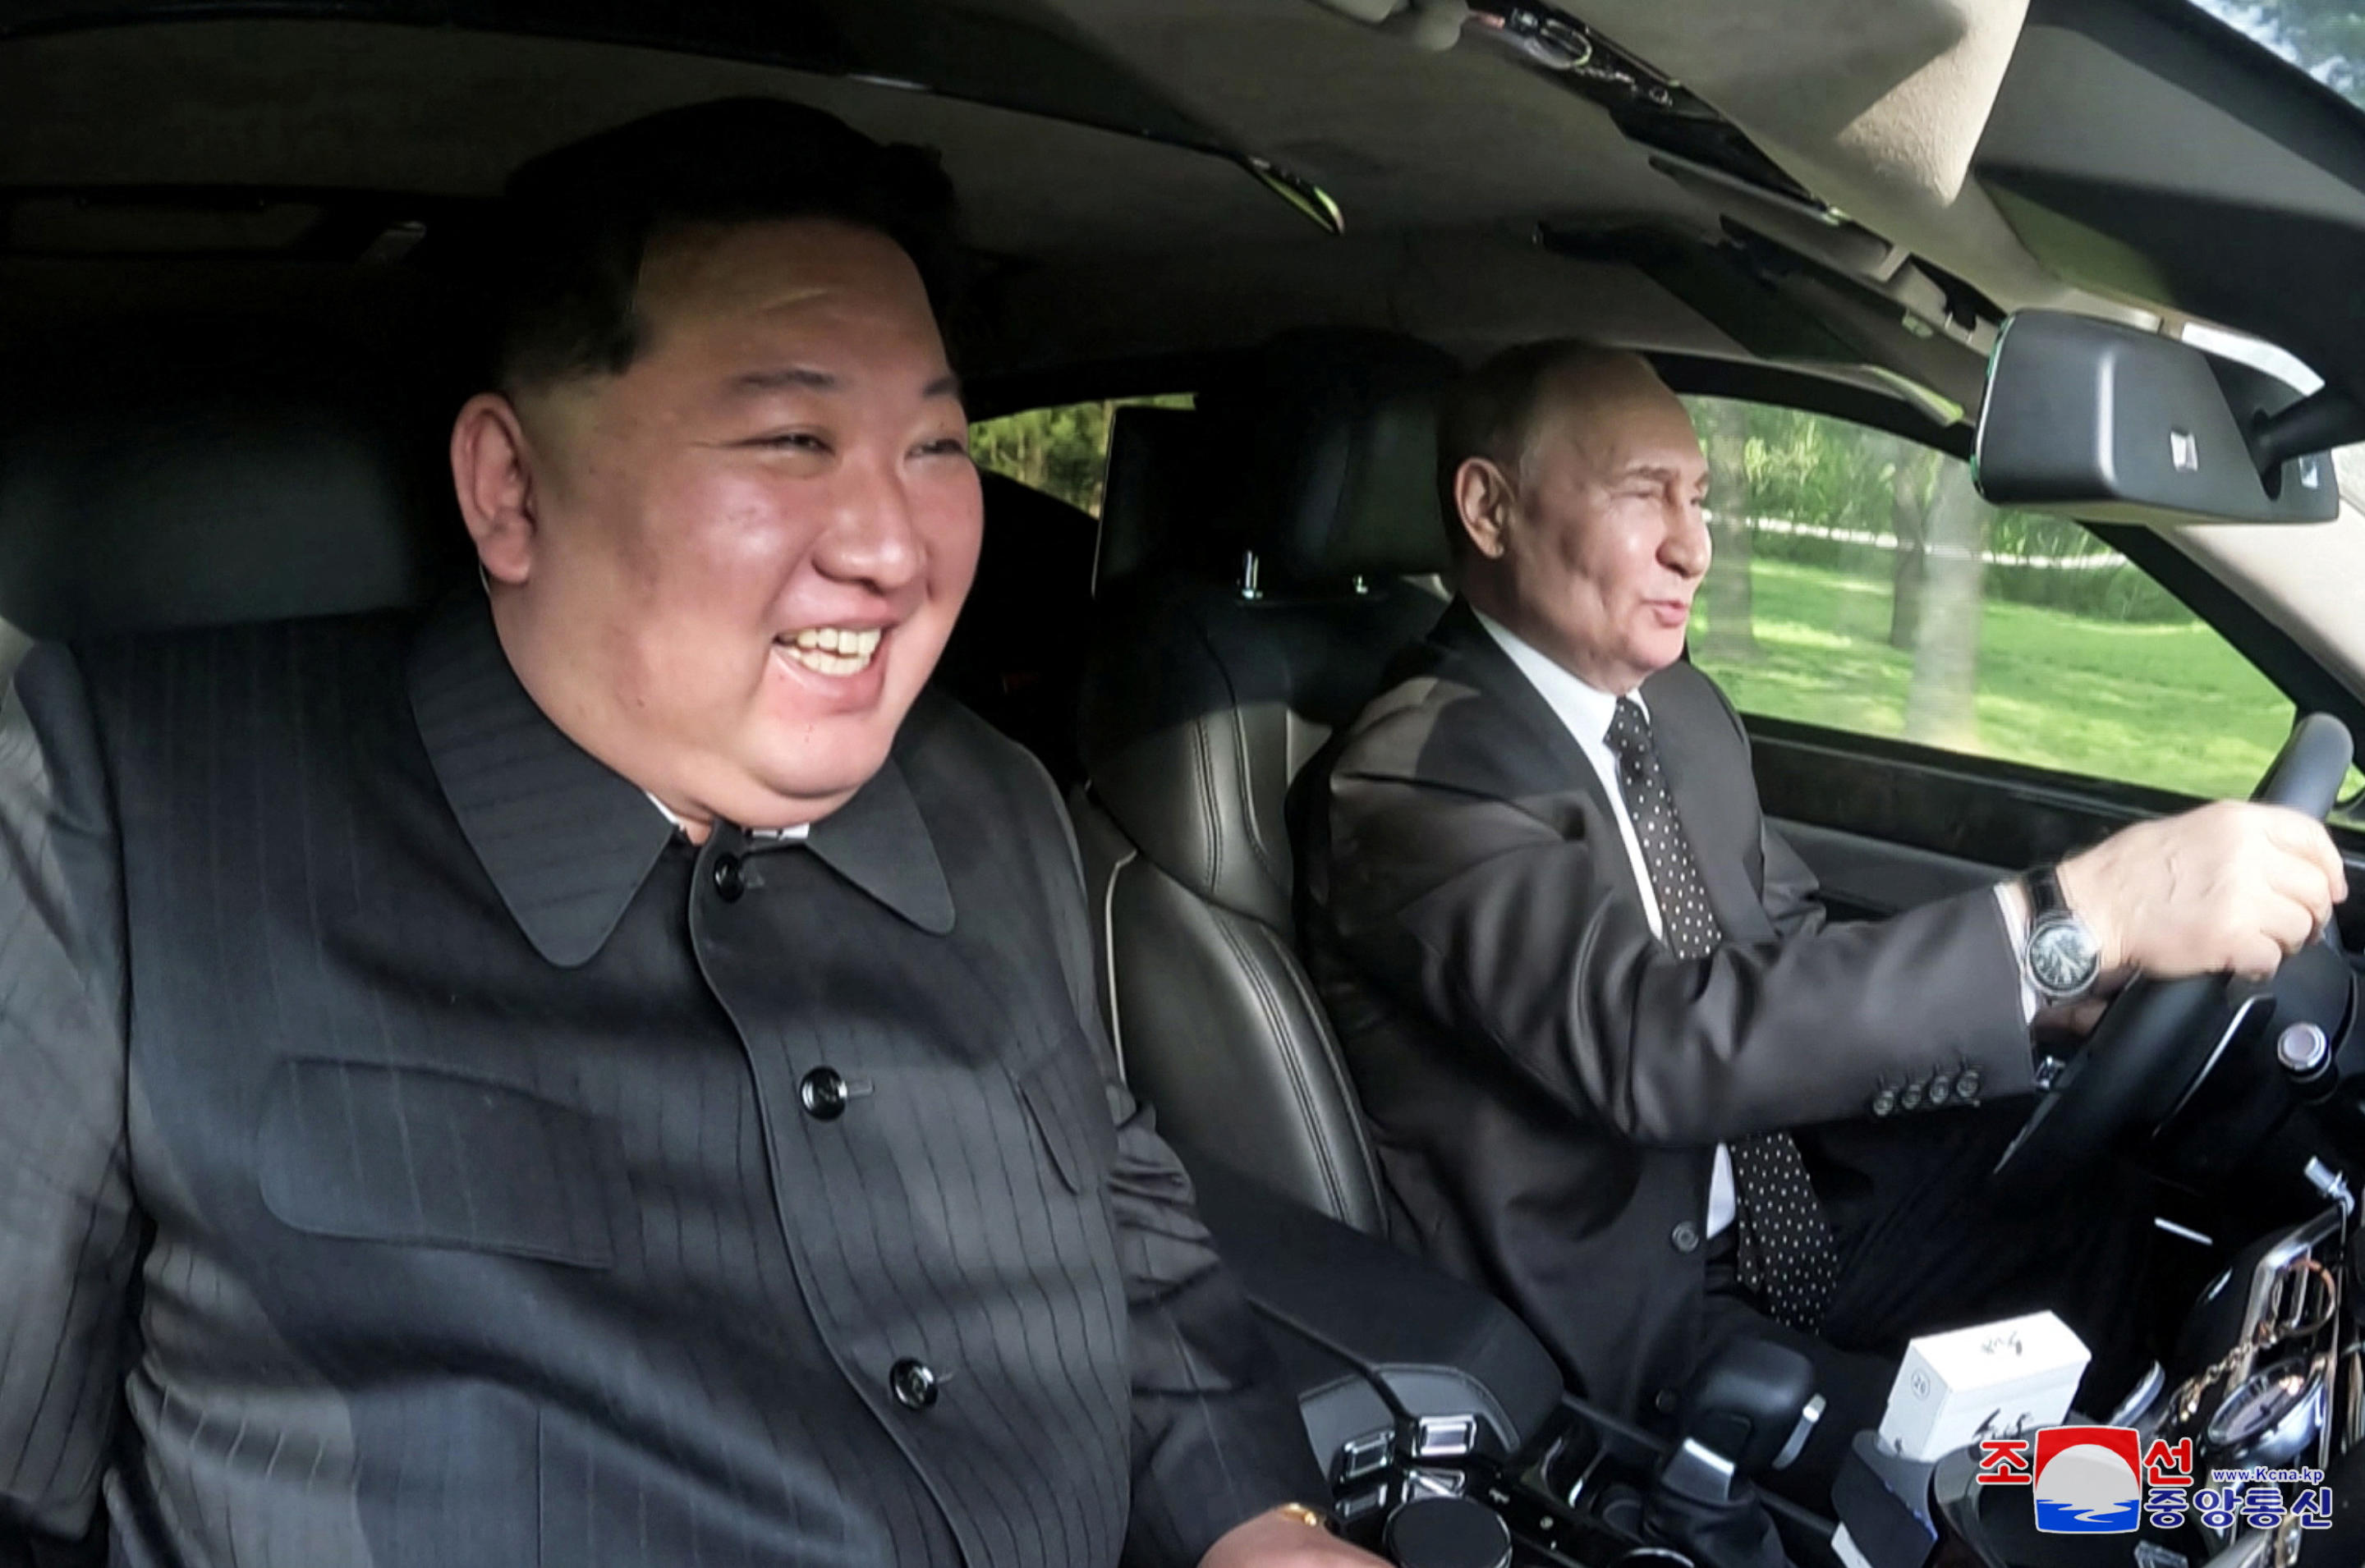 Russia's President Vladimir Putin and North Korea's leader Kim Jong Un ride an Aurus car in Pyongyang, North Korea in this image released by the Korean Central News Agency June 20, 2024.    (KCNA via Reuters)